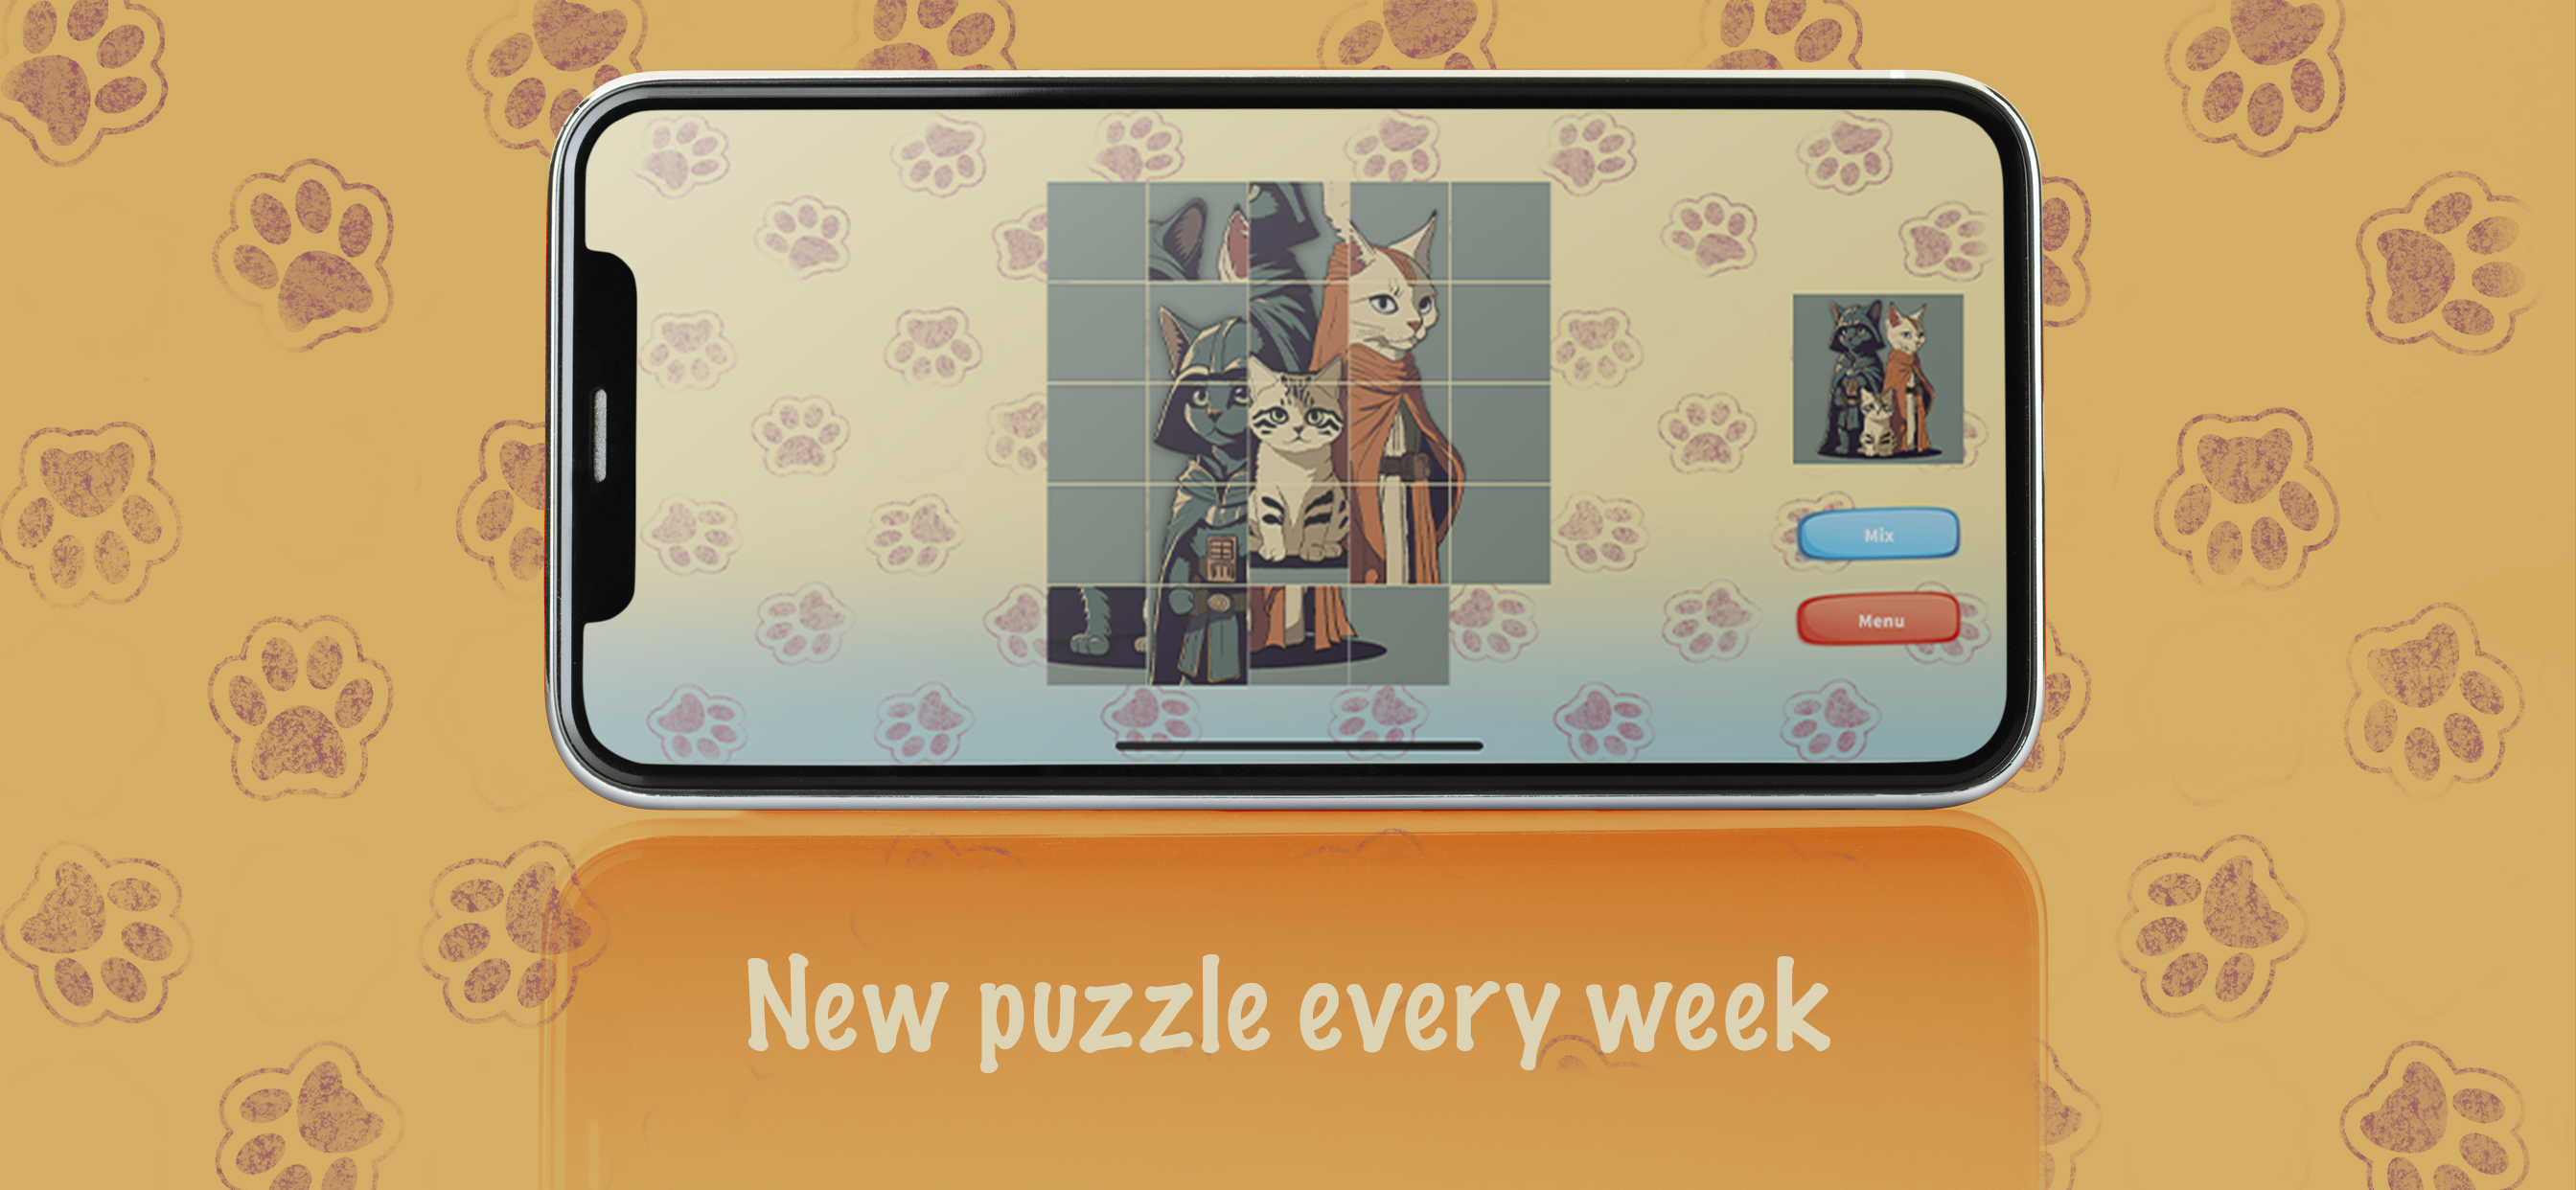 Cats & Dogs Puzzle Mania screenshot game